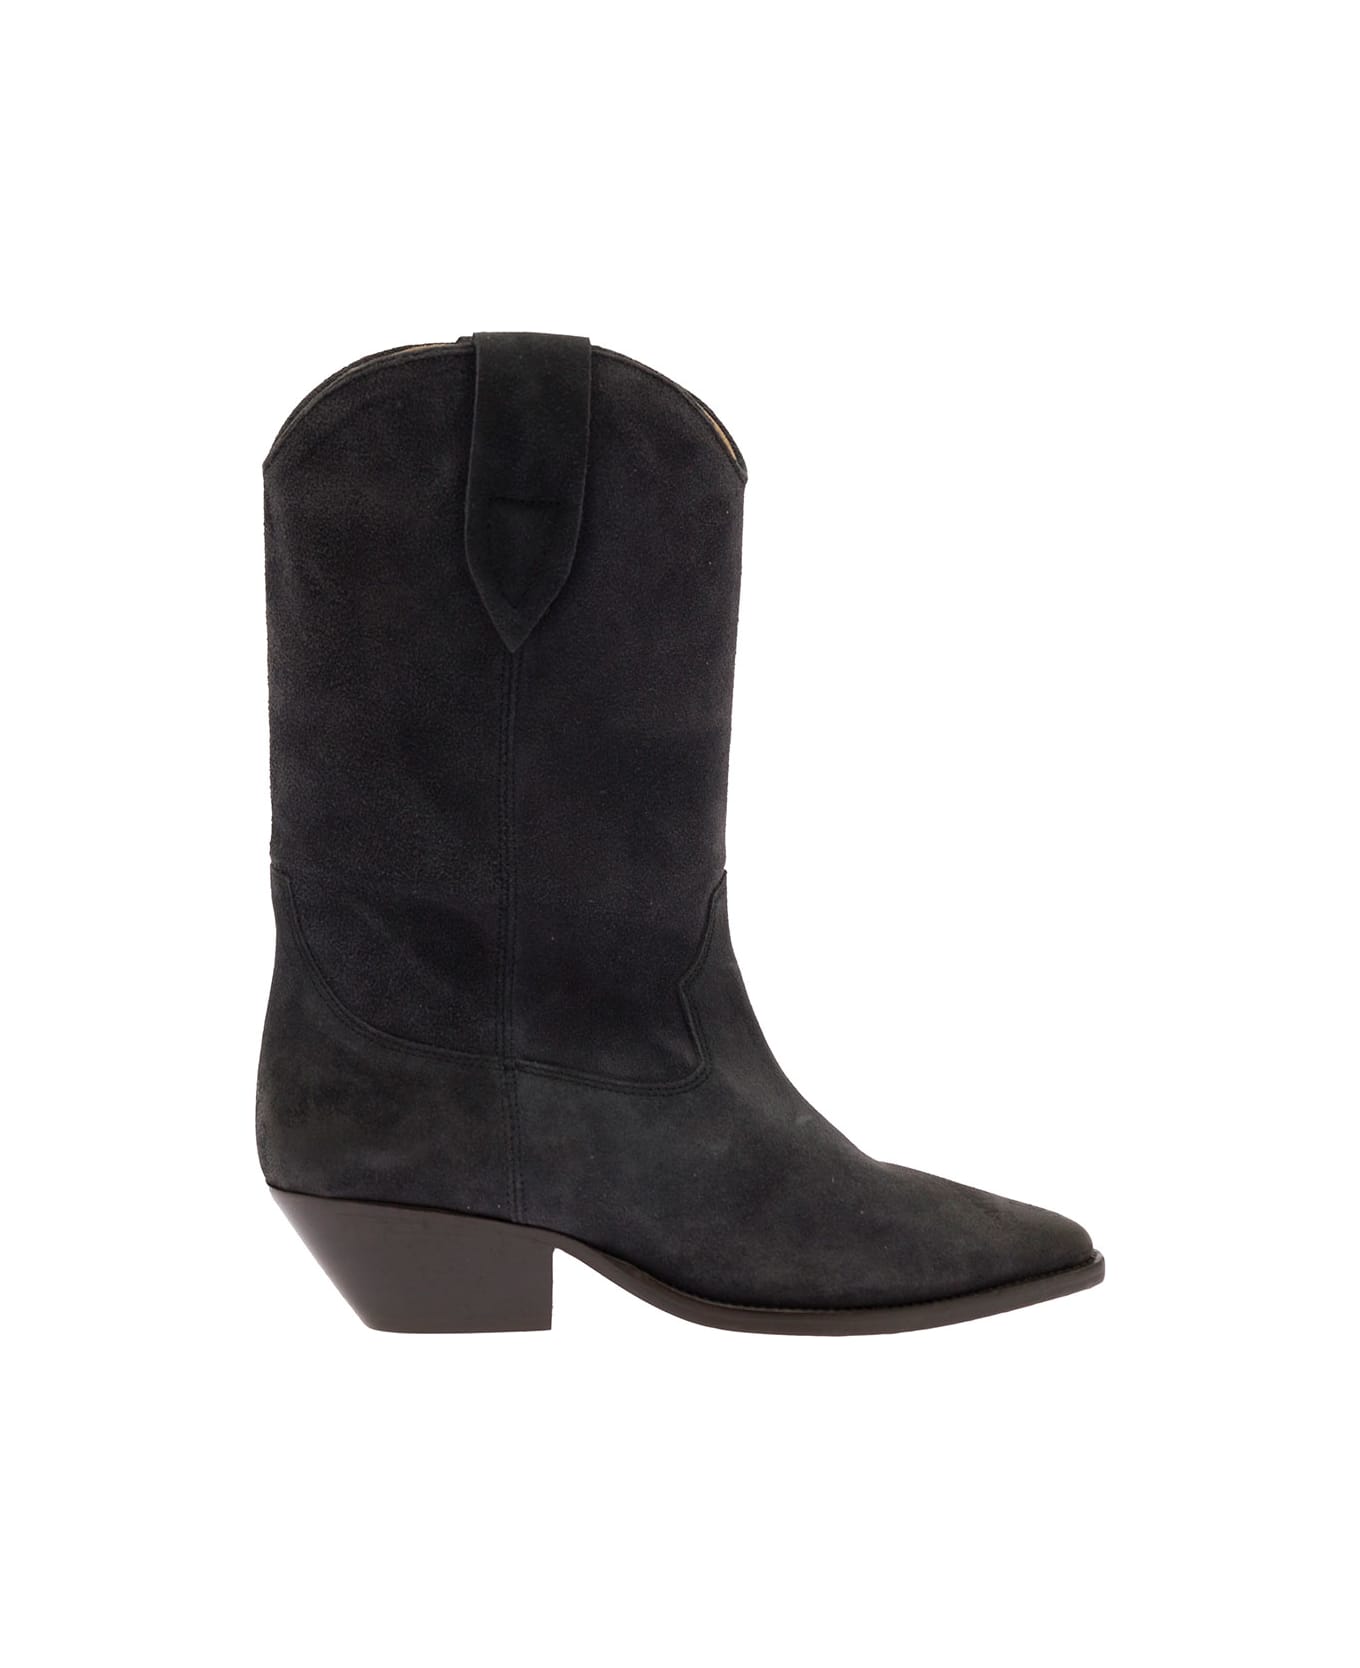 Isabel Marant 'duerto' Beige Western Style Boots In Suede Woman - Black